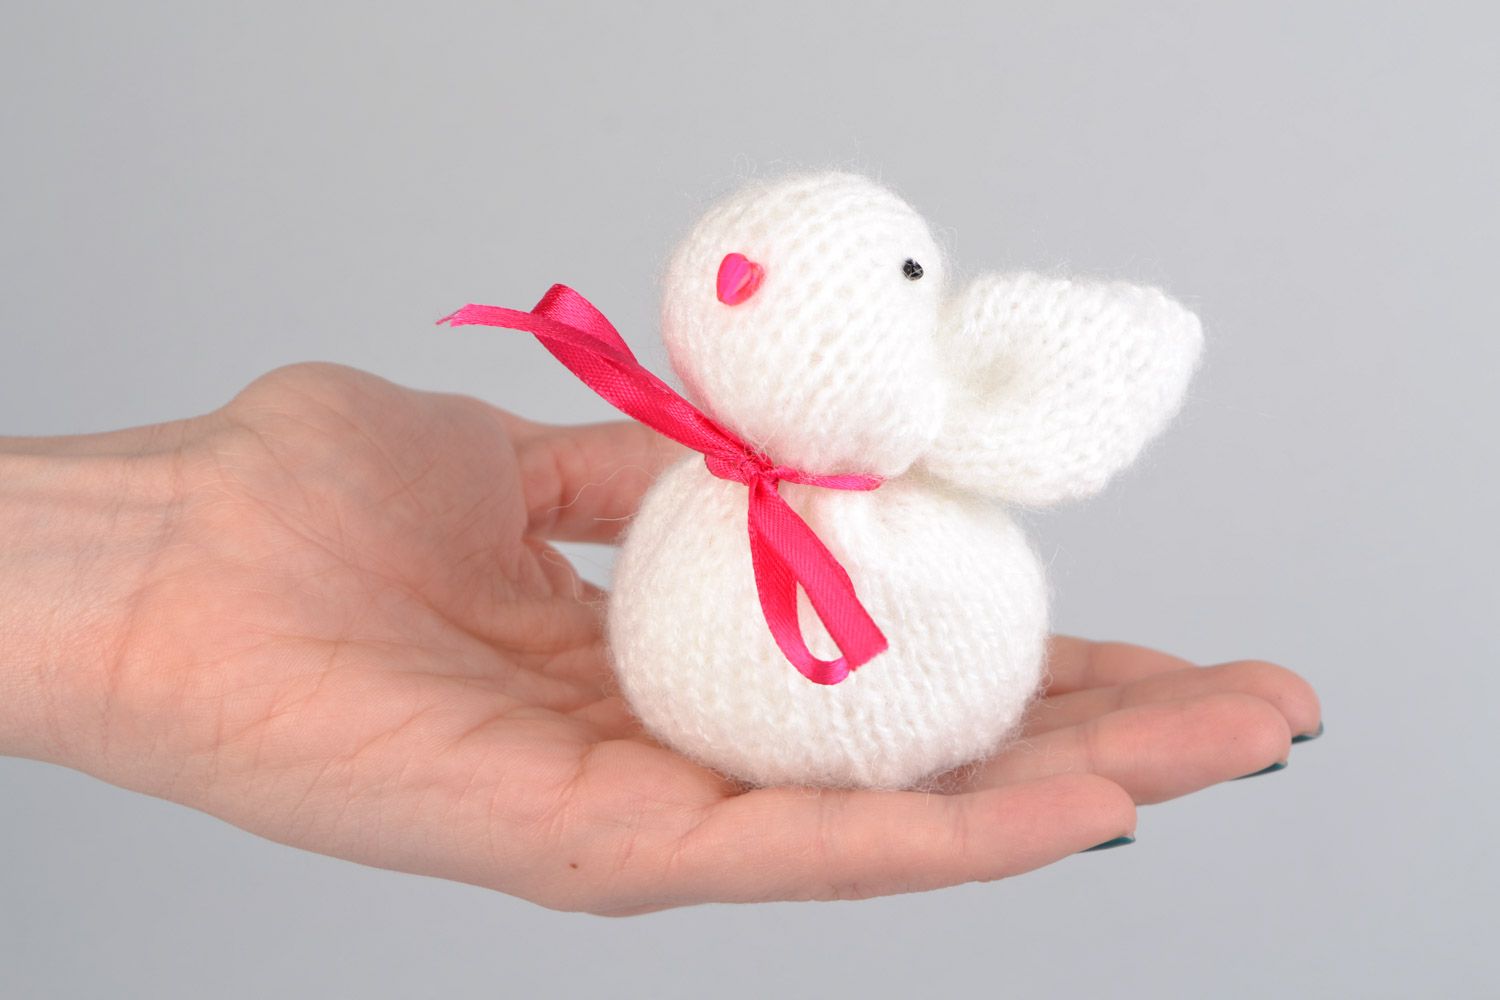 Handmade soft toy knitted of angora wool in the shape of white rabbit with pink bow photo 2